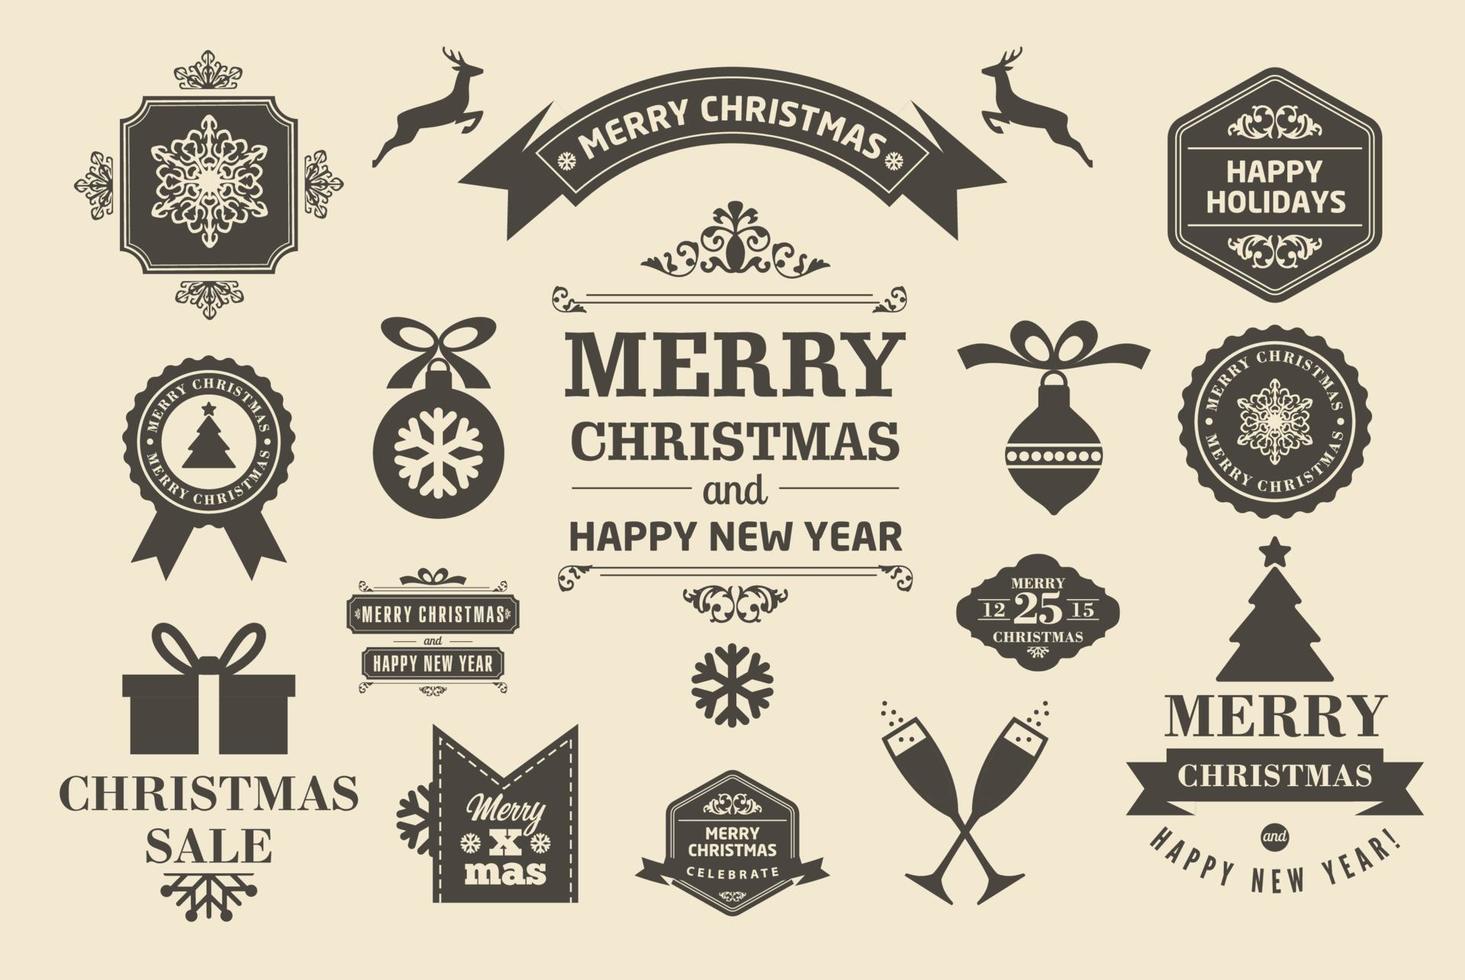 New Year Retro Icons, Elements labels And Illustration Set lettering phrases for Christmas vector